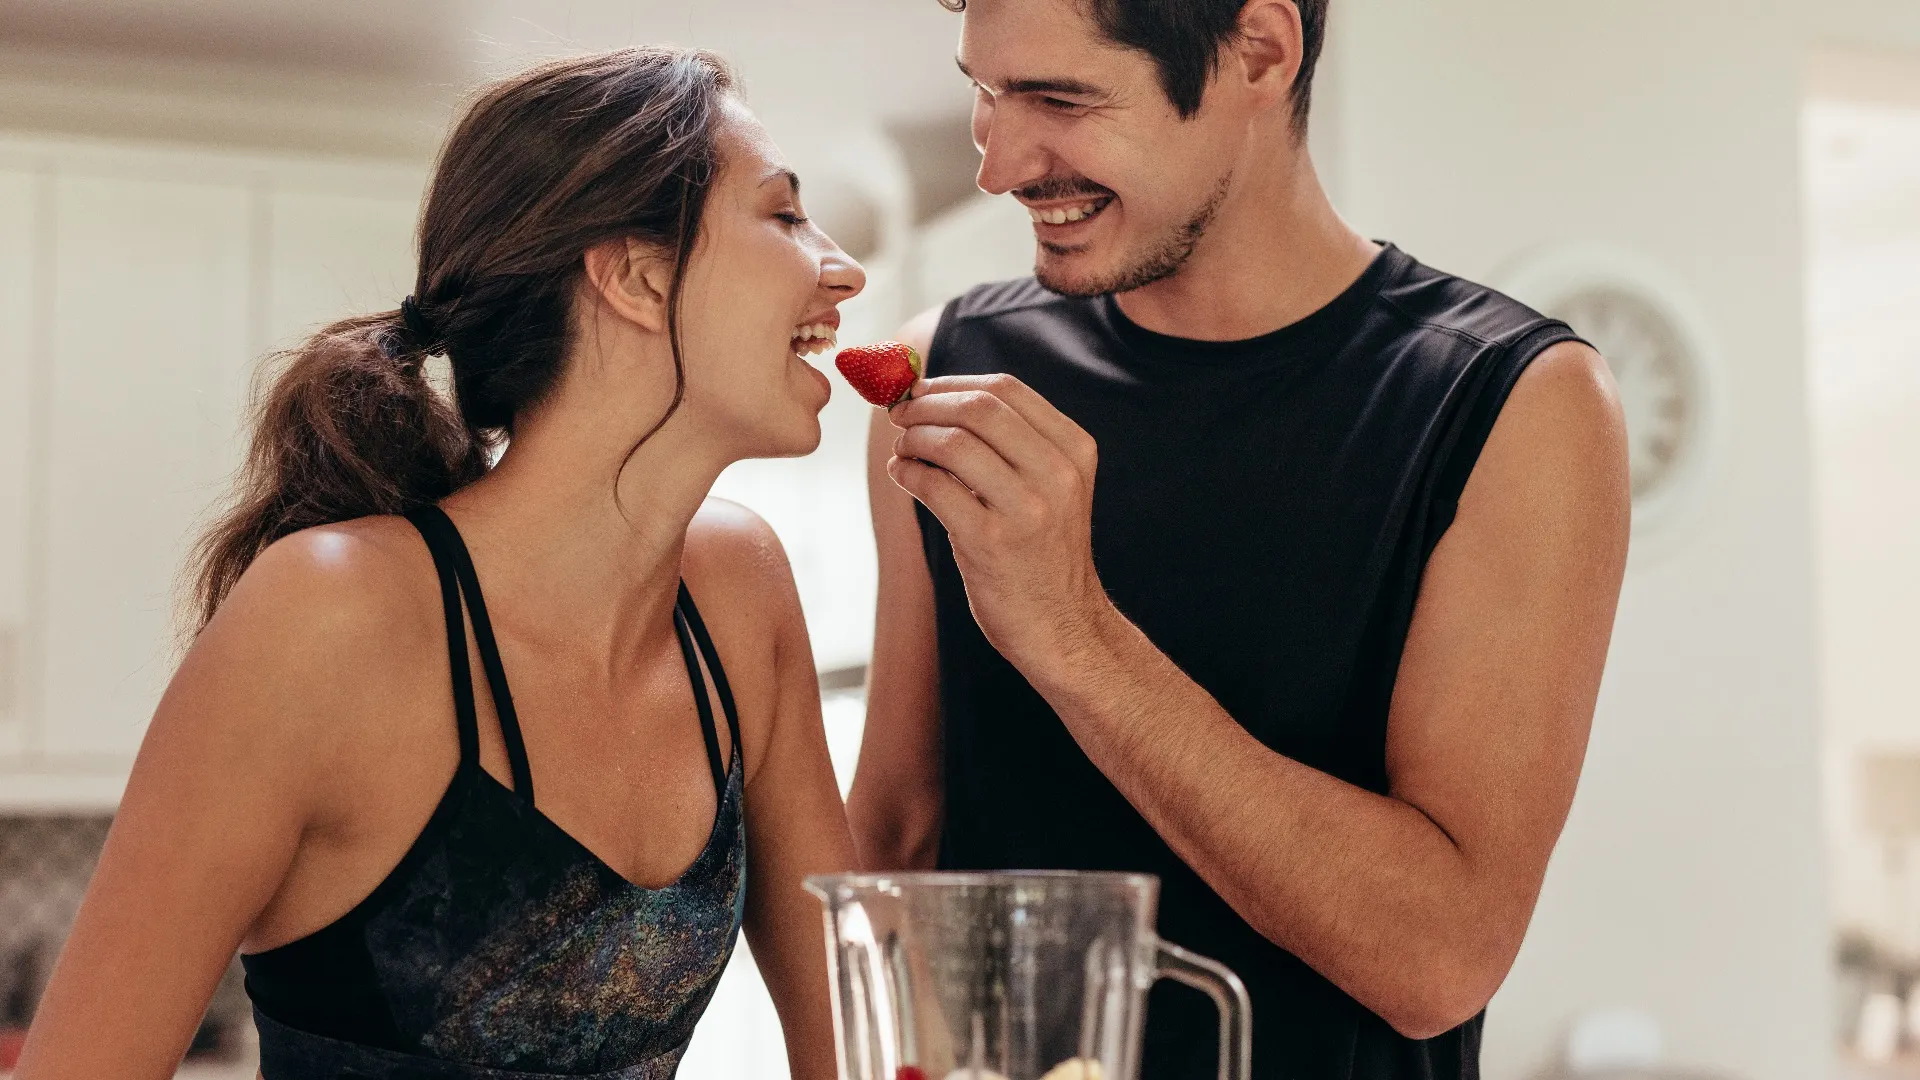 Can Love Help Health? 6 Potential Benefits of Healthy Relationships